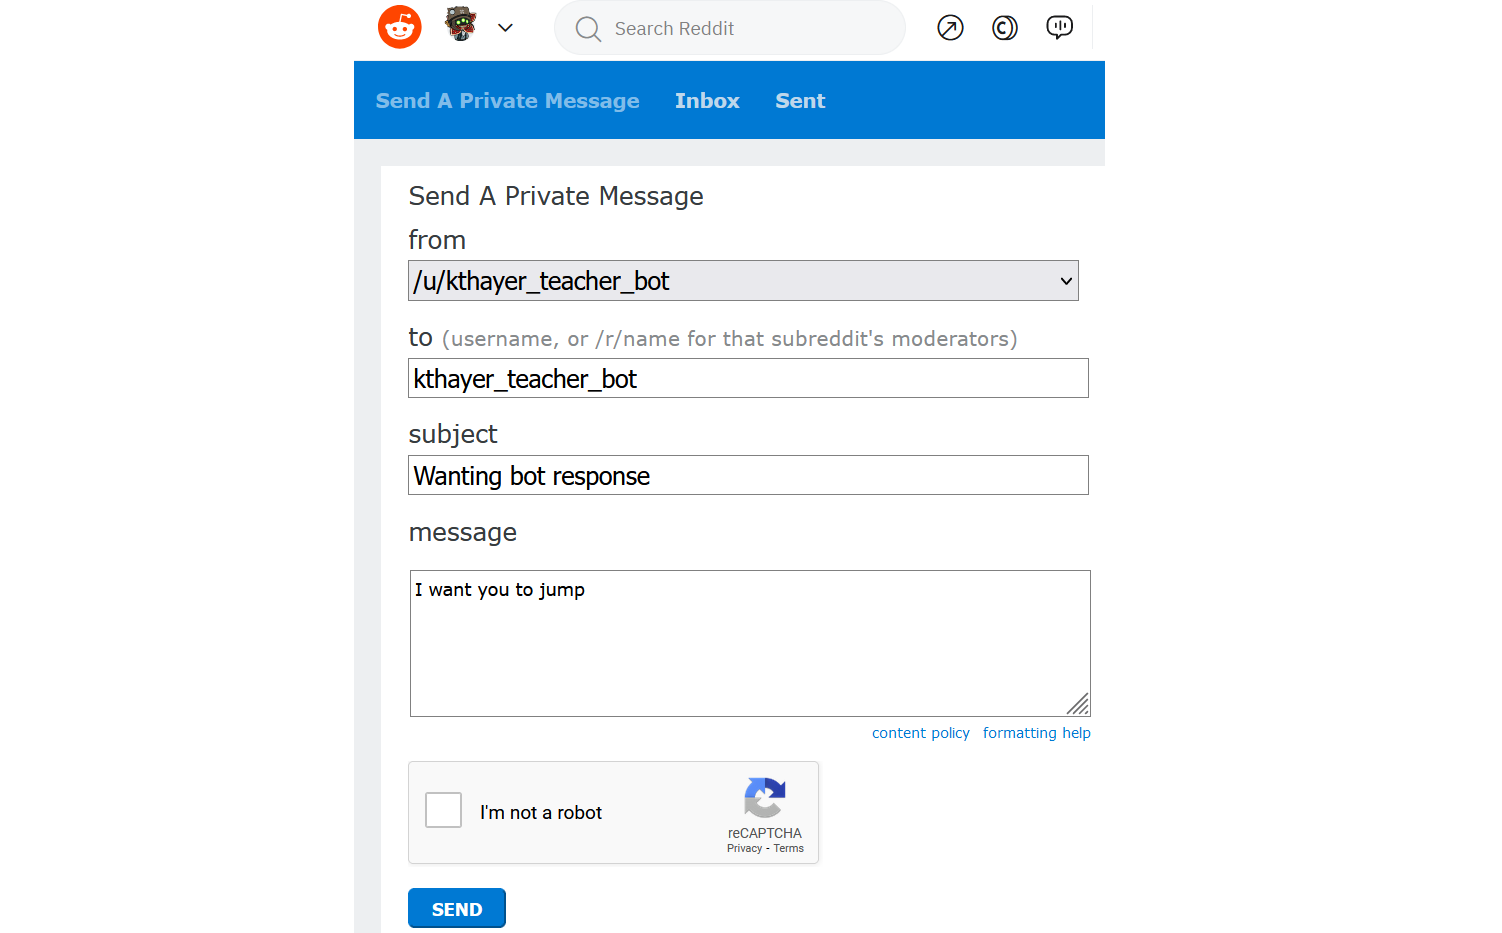 The Reddit "Send a Private Message" screen, with From "/u/kthayer_teacher_bot" filled in by default and uneditable, then To "kthayer_teacher_bot", Subject "Wanting bot response" and Body "I want you to jump"